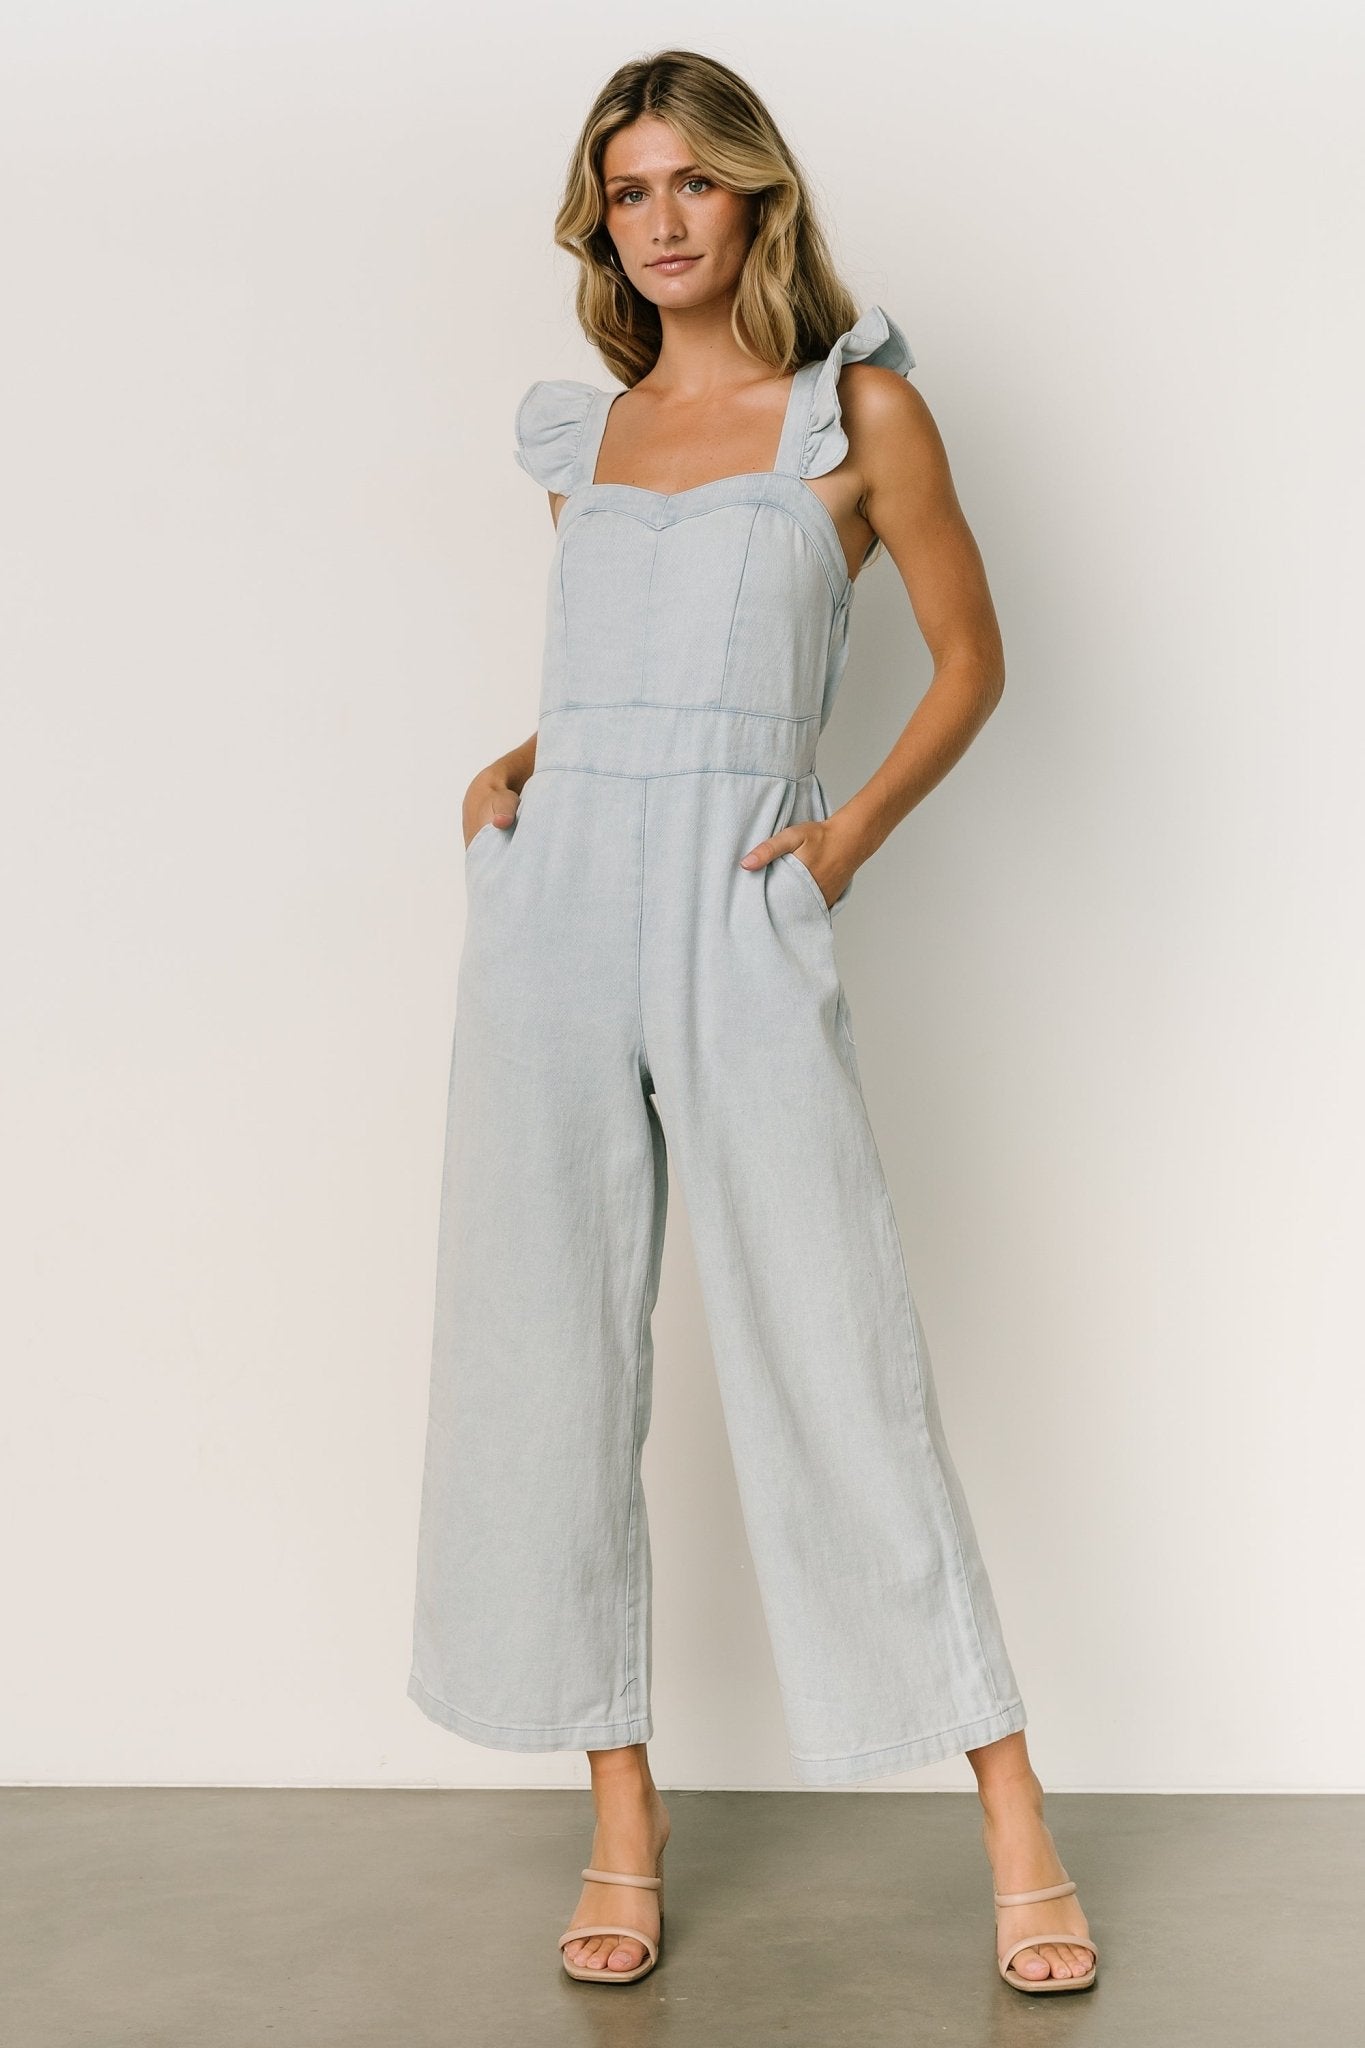 Idyllwind Women's Barlow Lace-Up Denim Jumpsuit - Country Outfitter